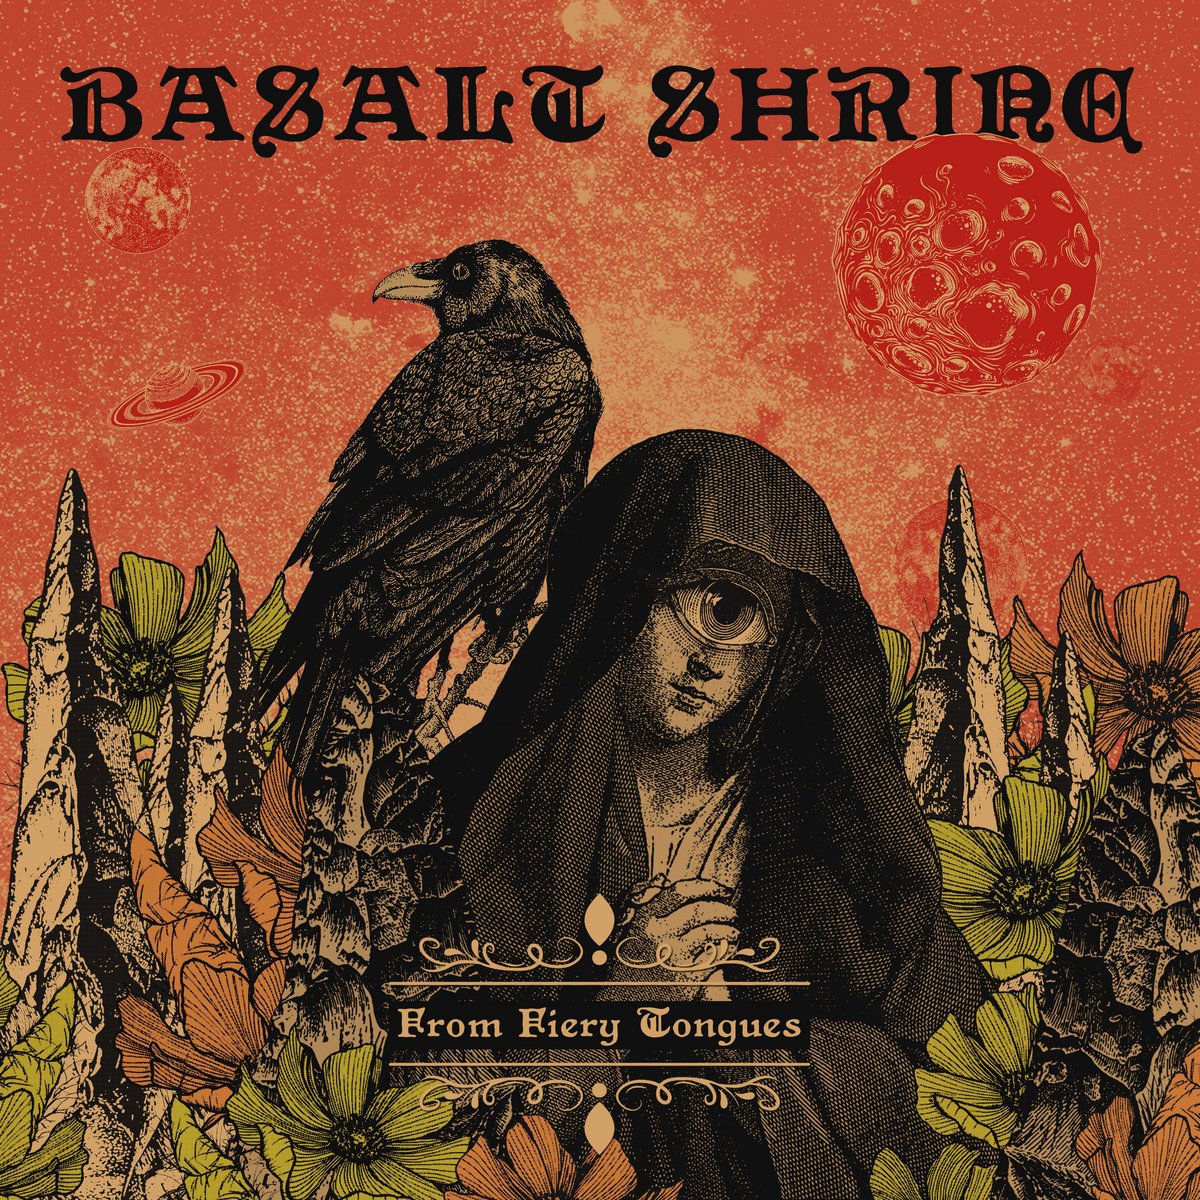 ALBUM REVIEW: Basalt Shrine – From Fiery Tongues